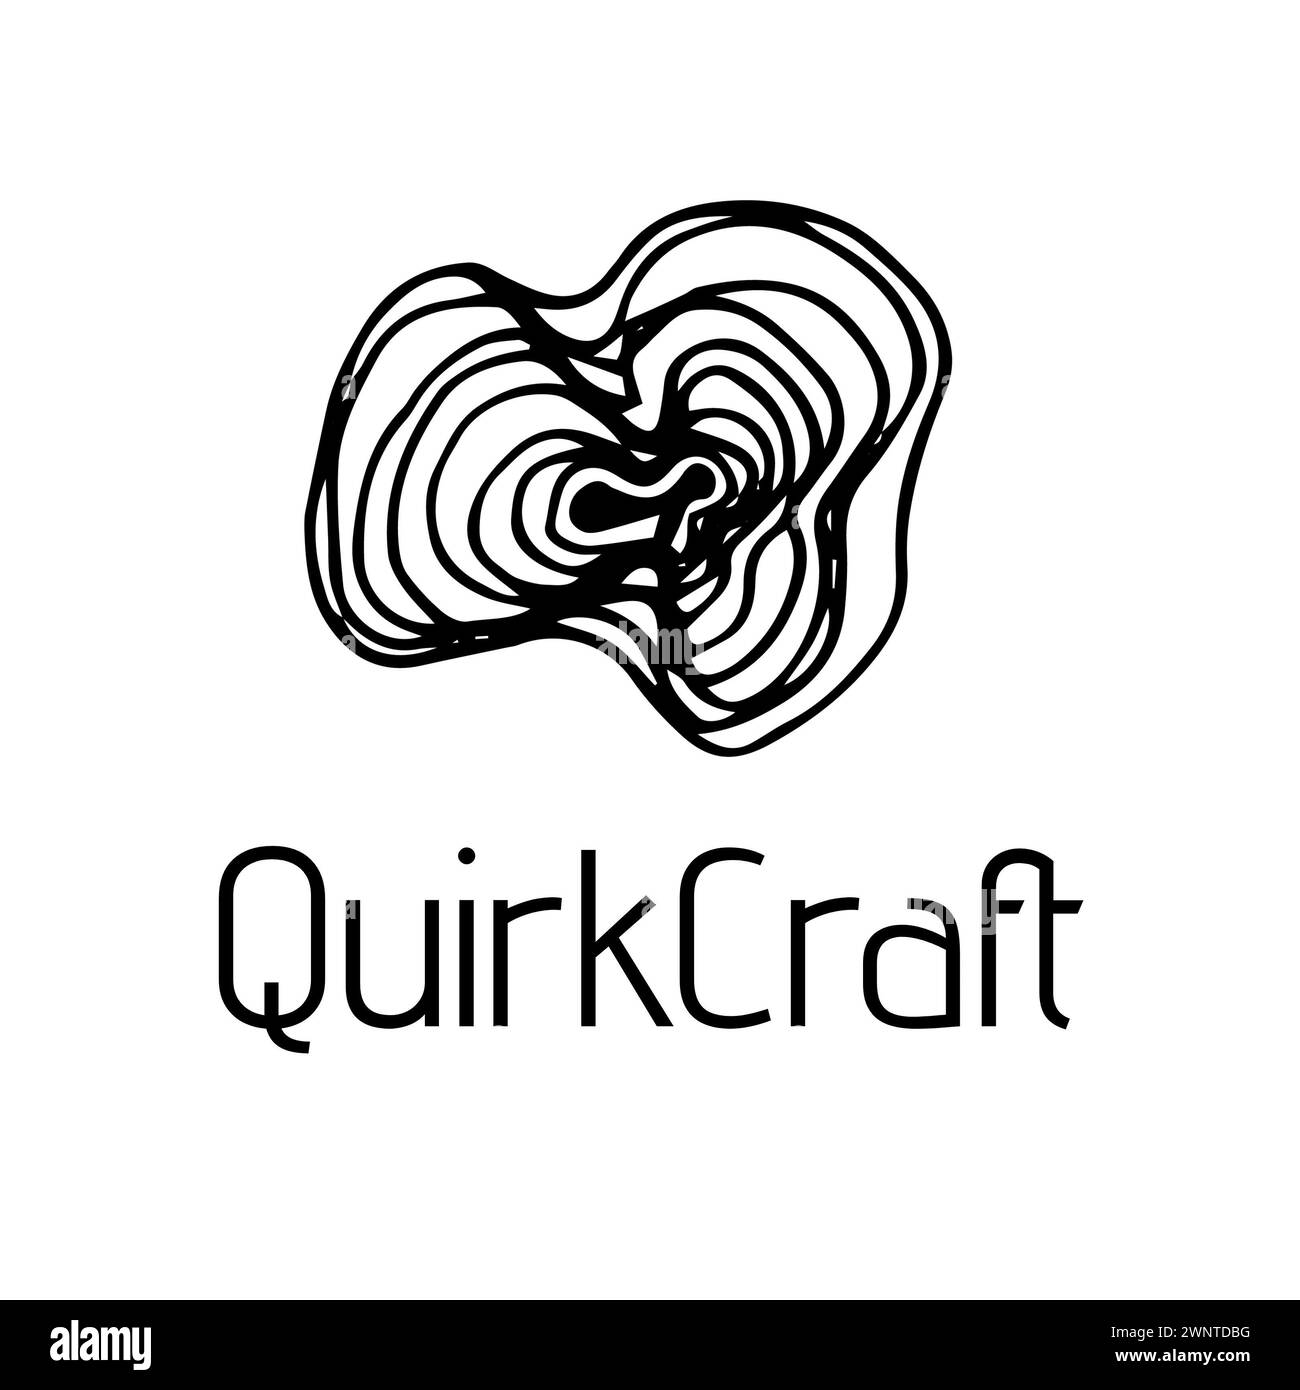 Promoting creativity, the abstract line art in this logo suggests innovation and artistic flair Stock Photo